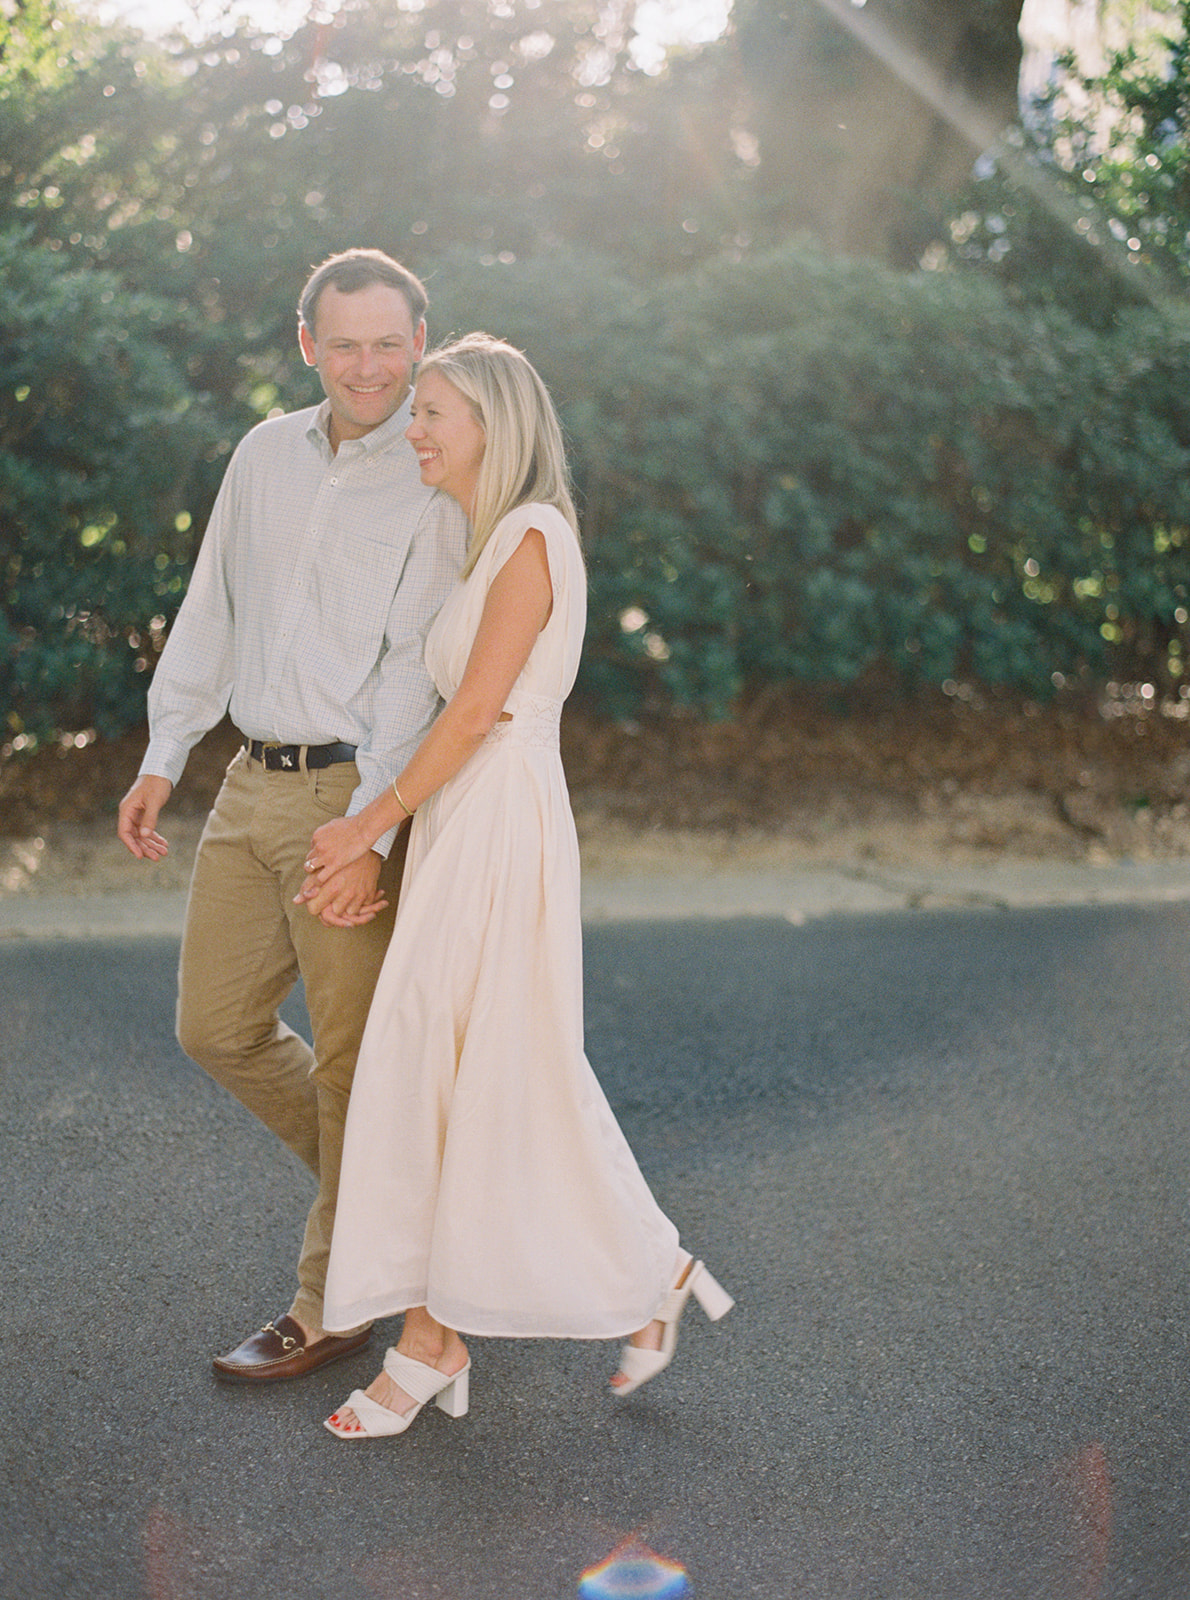 Engagement Session couple walking on street in near horses during golden hour in Thomasville, Georgia. Contax645